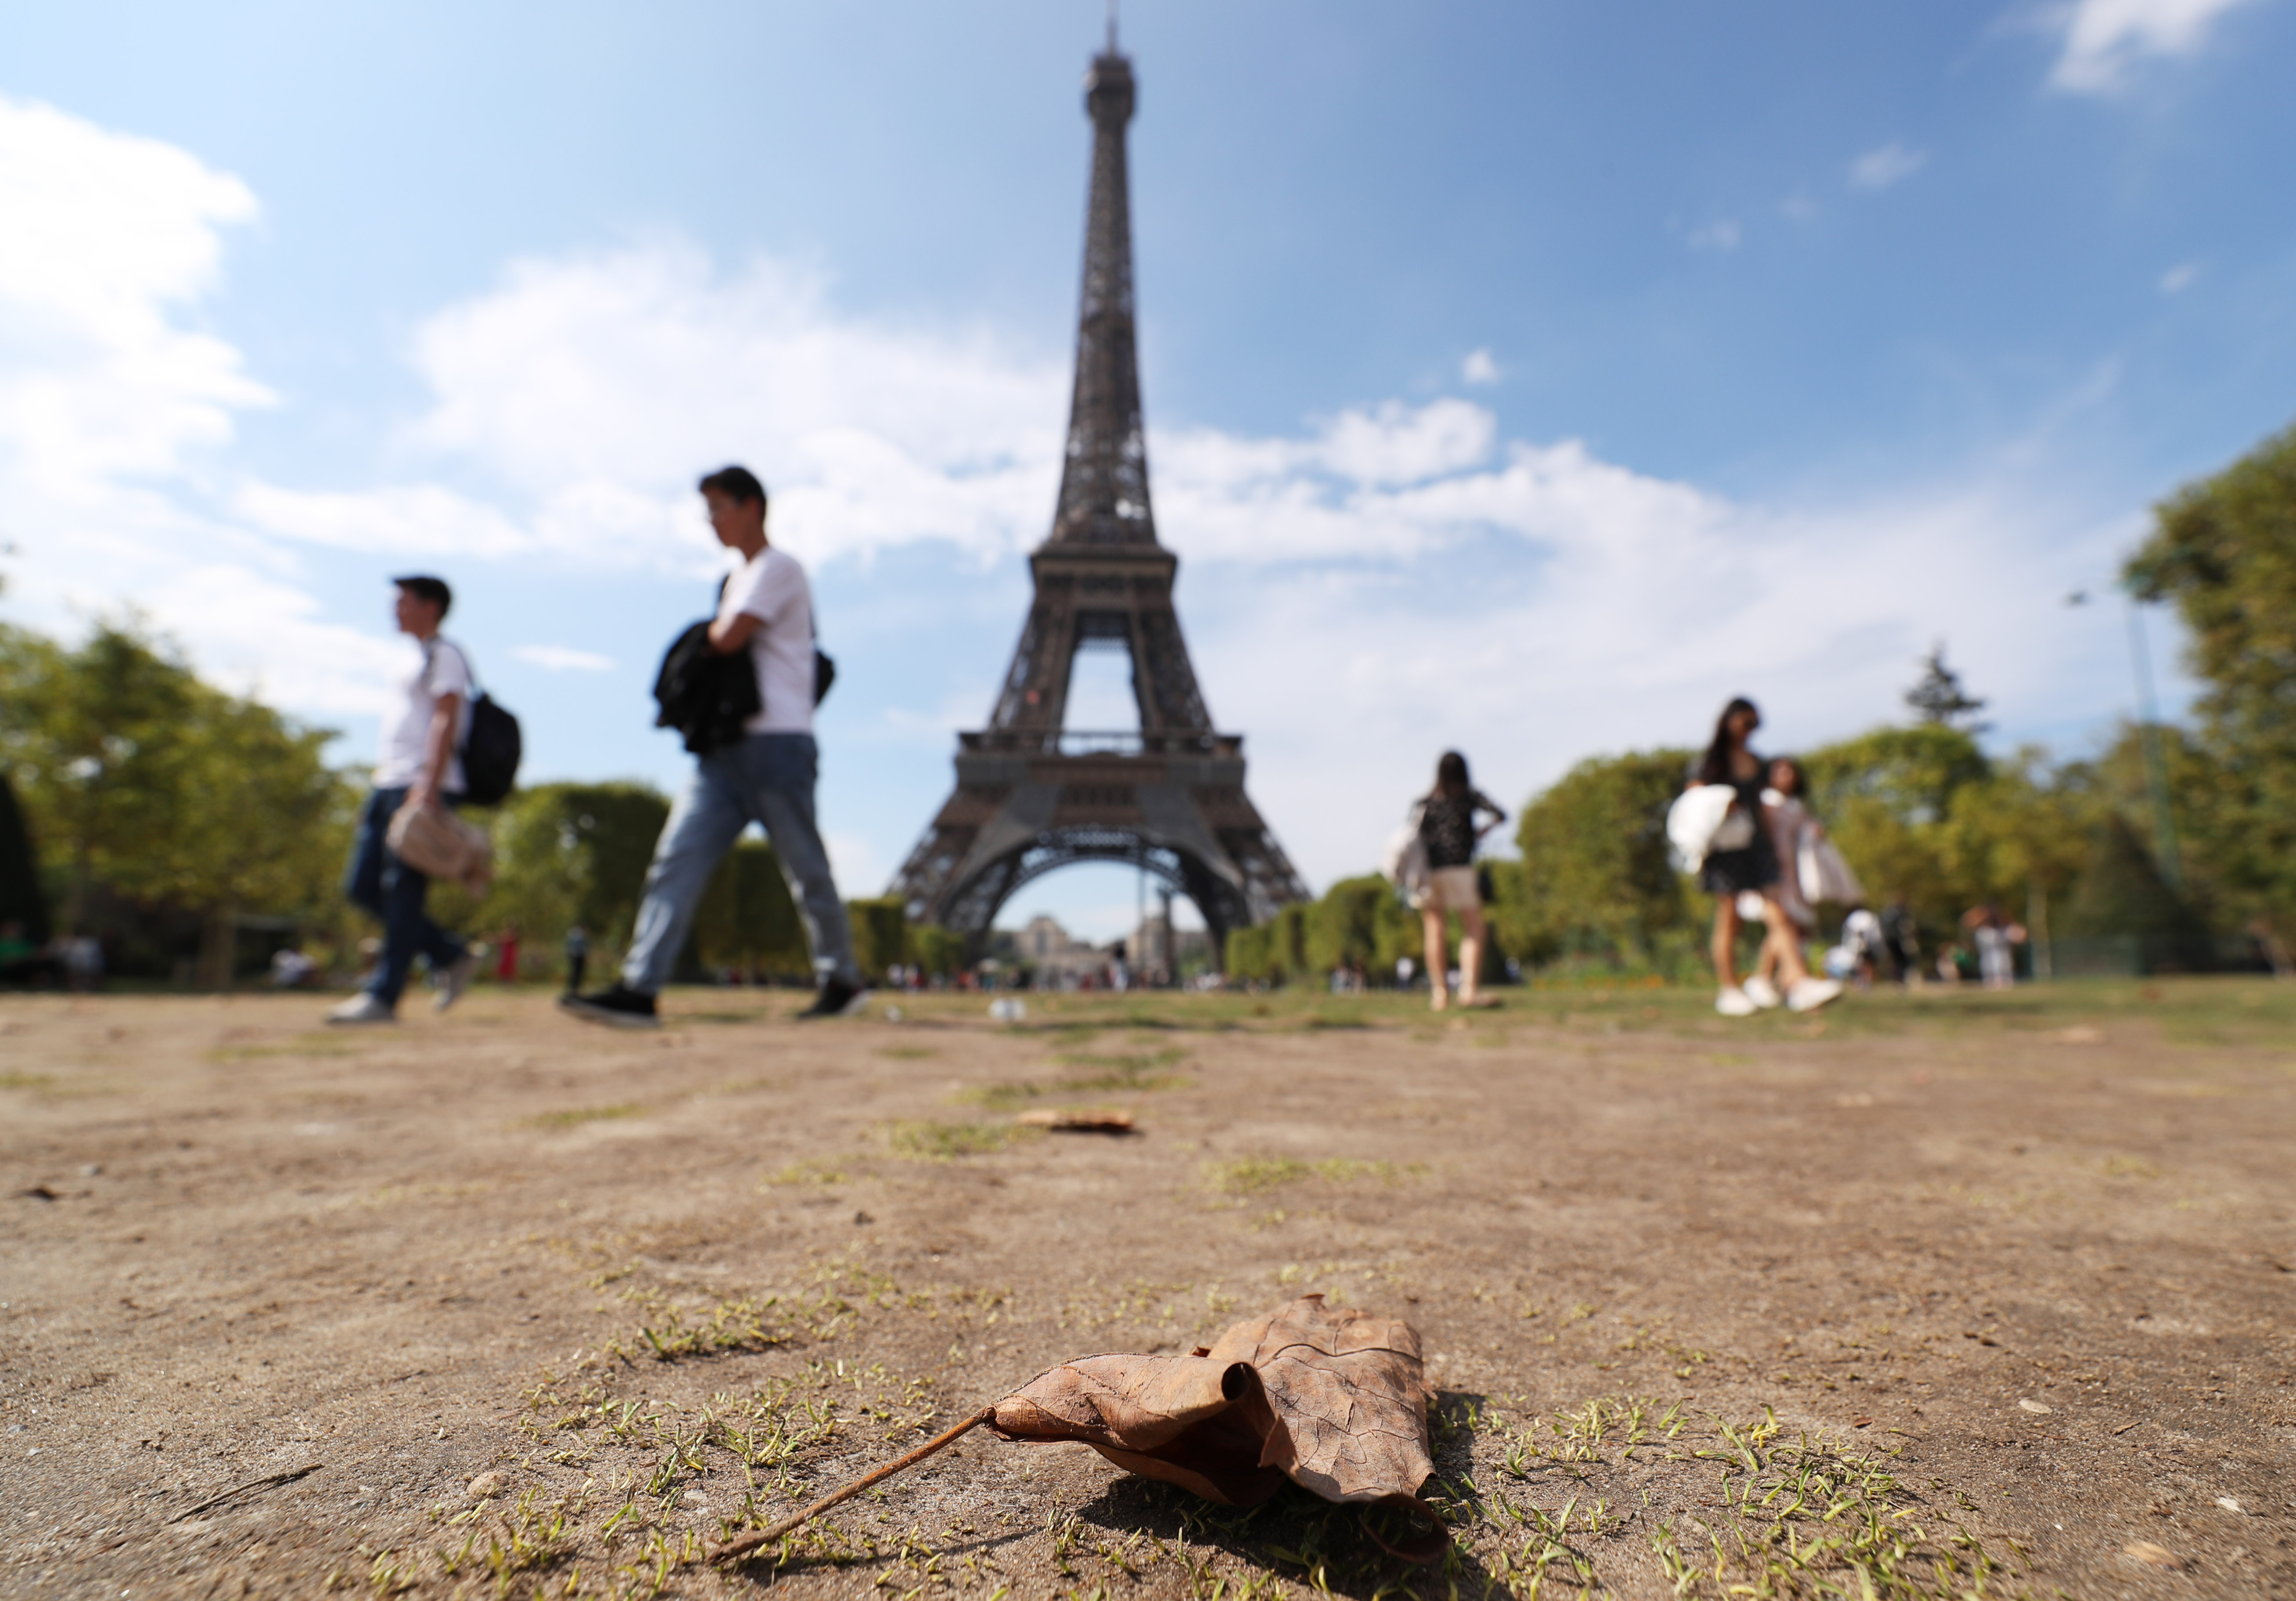 People walk on the Champ de Mars in front of the Eiffel tower in Paris, France, Aug. 17, 2022. As France is suffering a severe drought, water restriction measures have been imposed across the country.